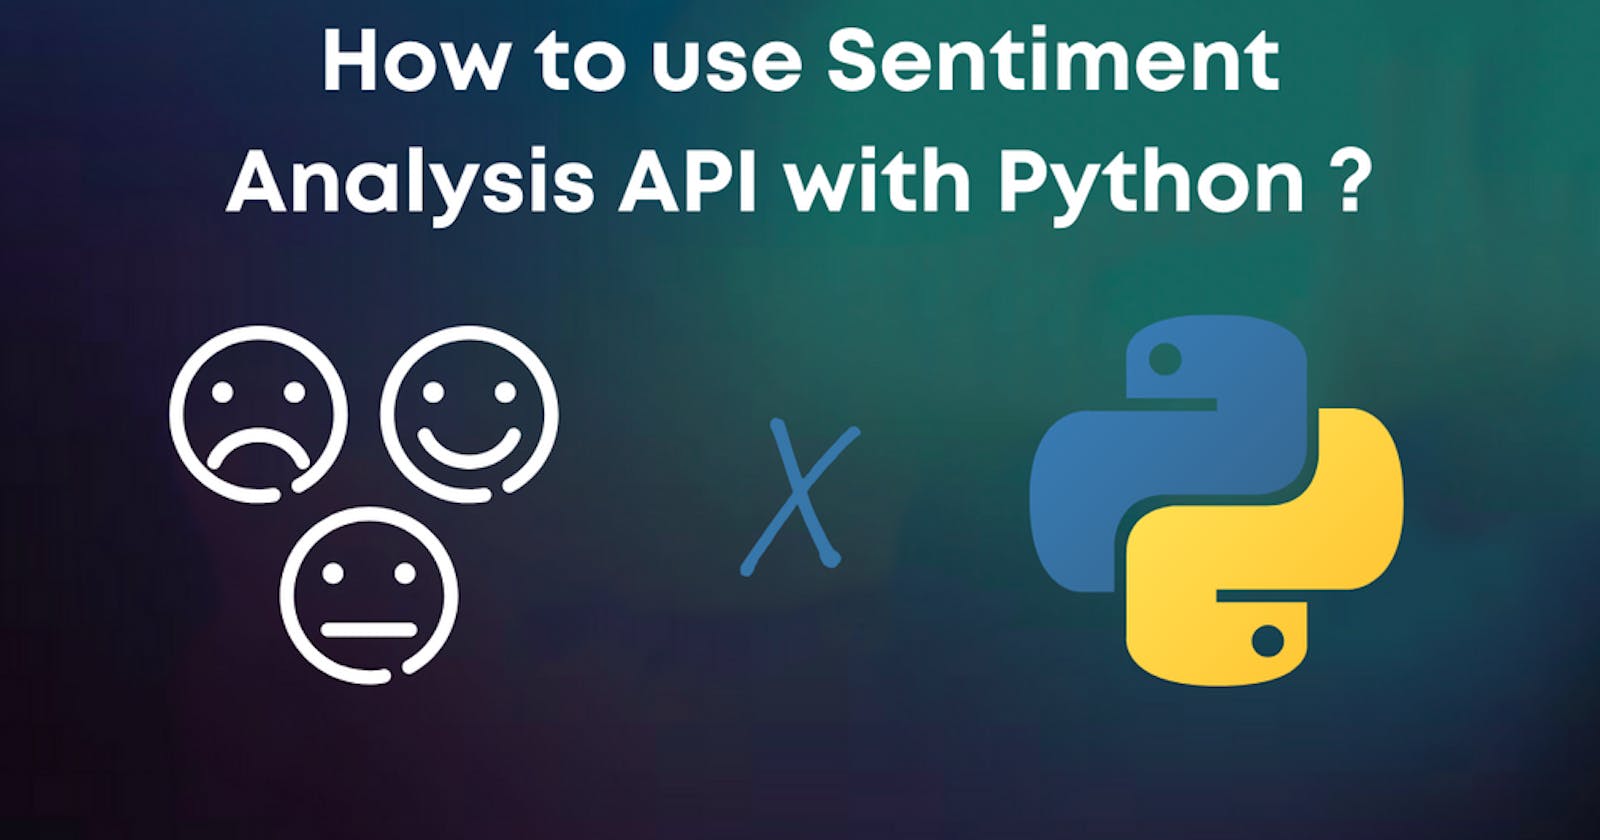 How to use Sentiment Analysis API with Python in 5 minutes?